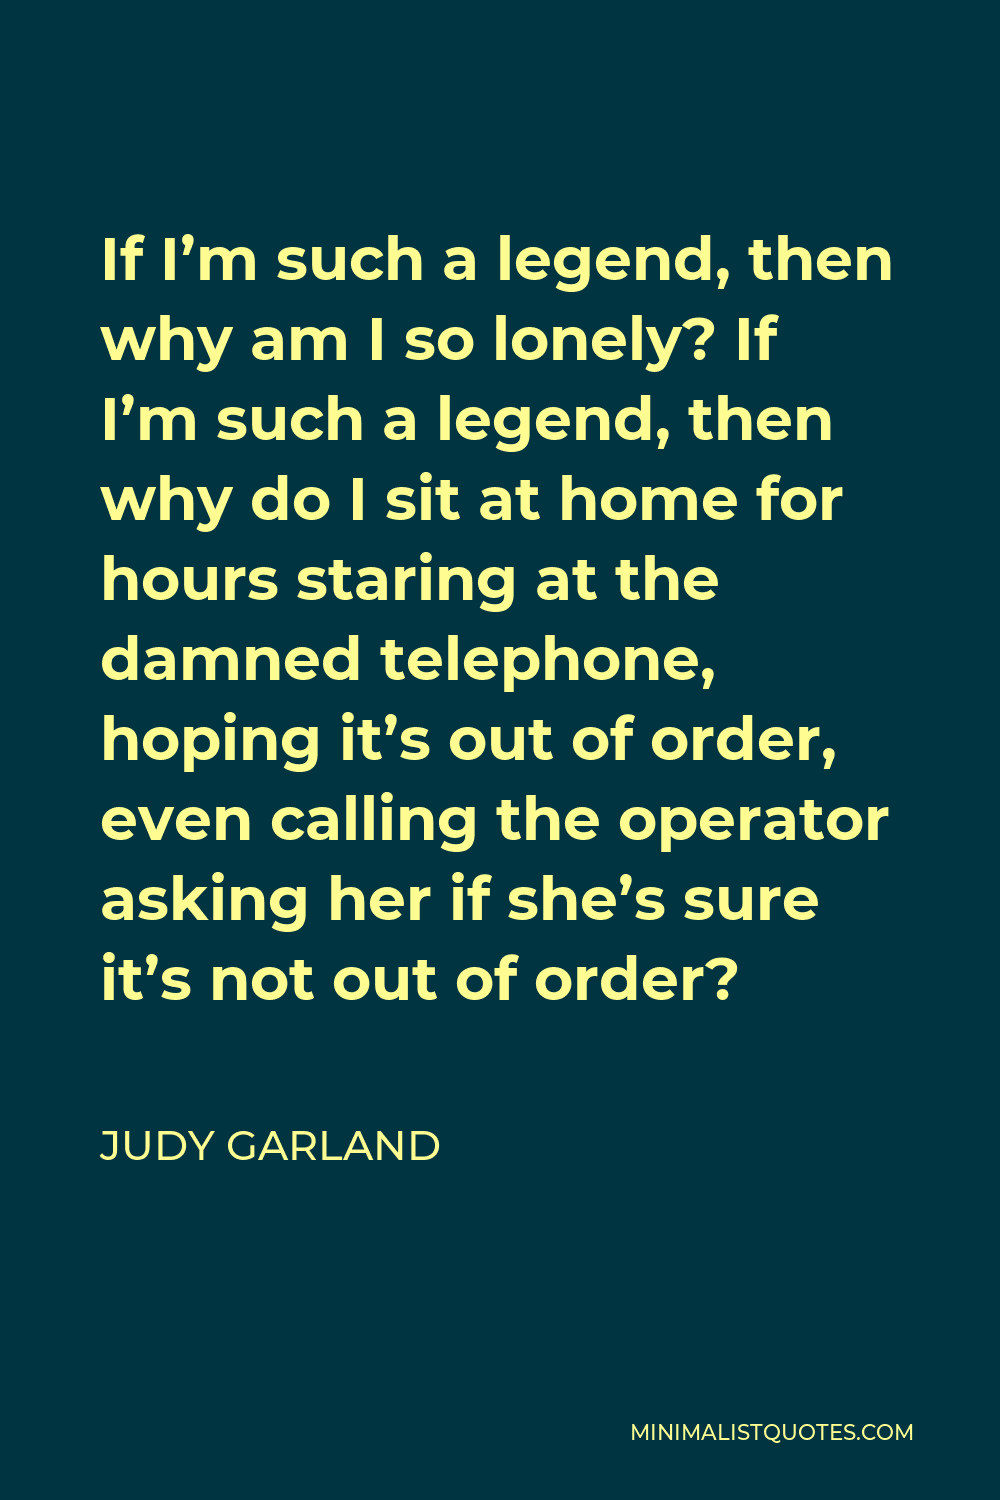 Judy Garland Quote - If I’m such a legend, then why am I so lonely? If I’m such a legend, then why do I sit at home for hours staring at the damned telephone, hoping it’s out of order, even calling the operator asking her if she’s sure it’s not out of order?